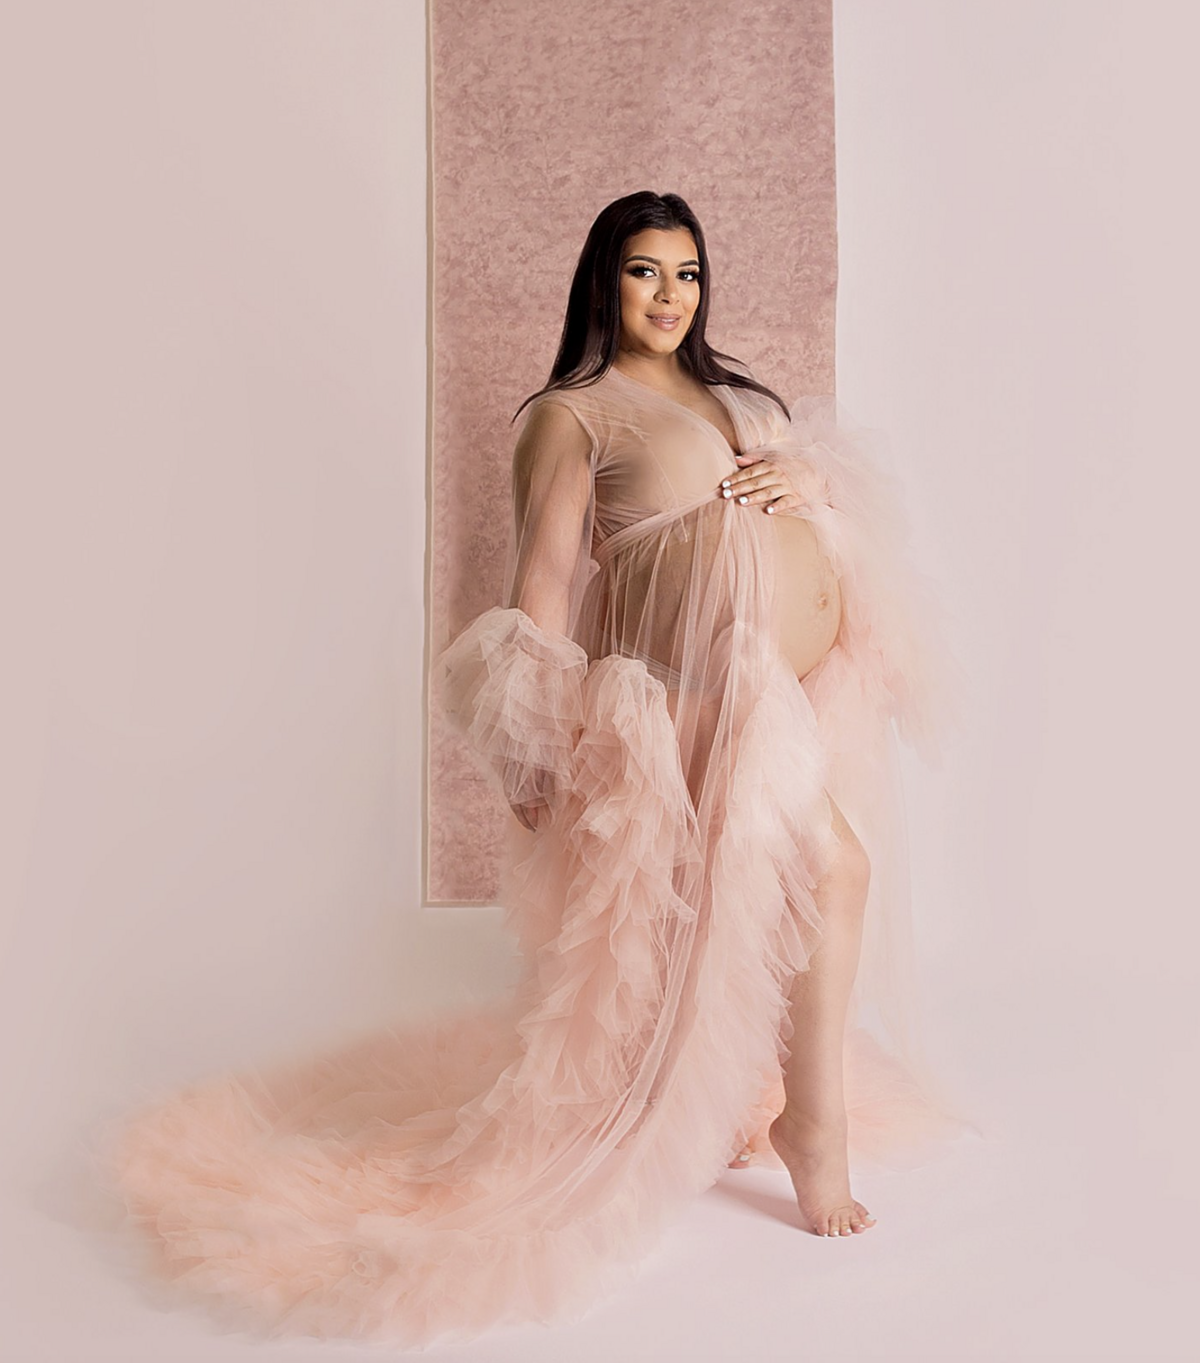 Pregnant women wearing pink gown during maternity photoshoot im Franklin Tennessee photography studio